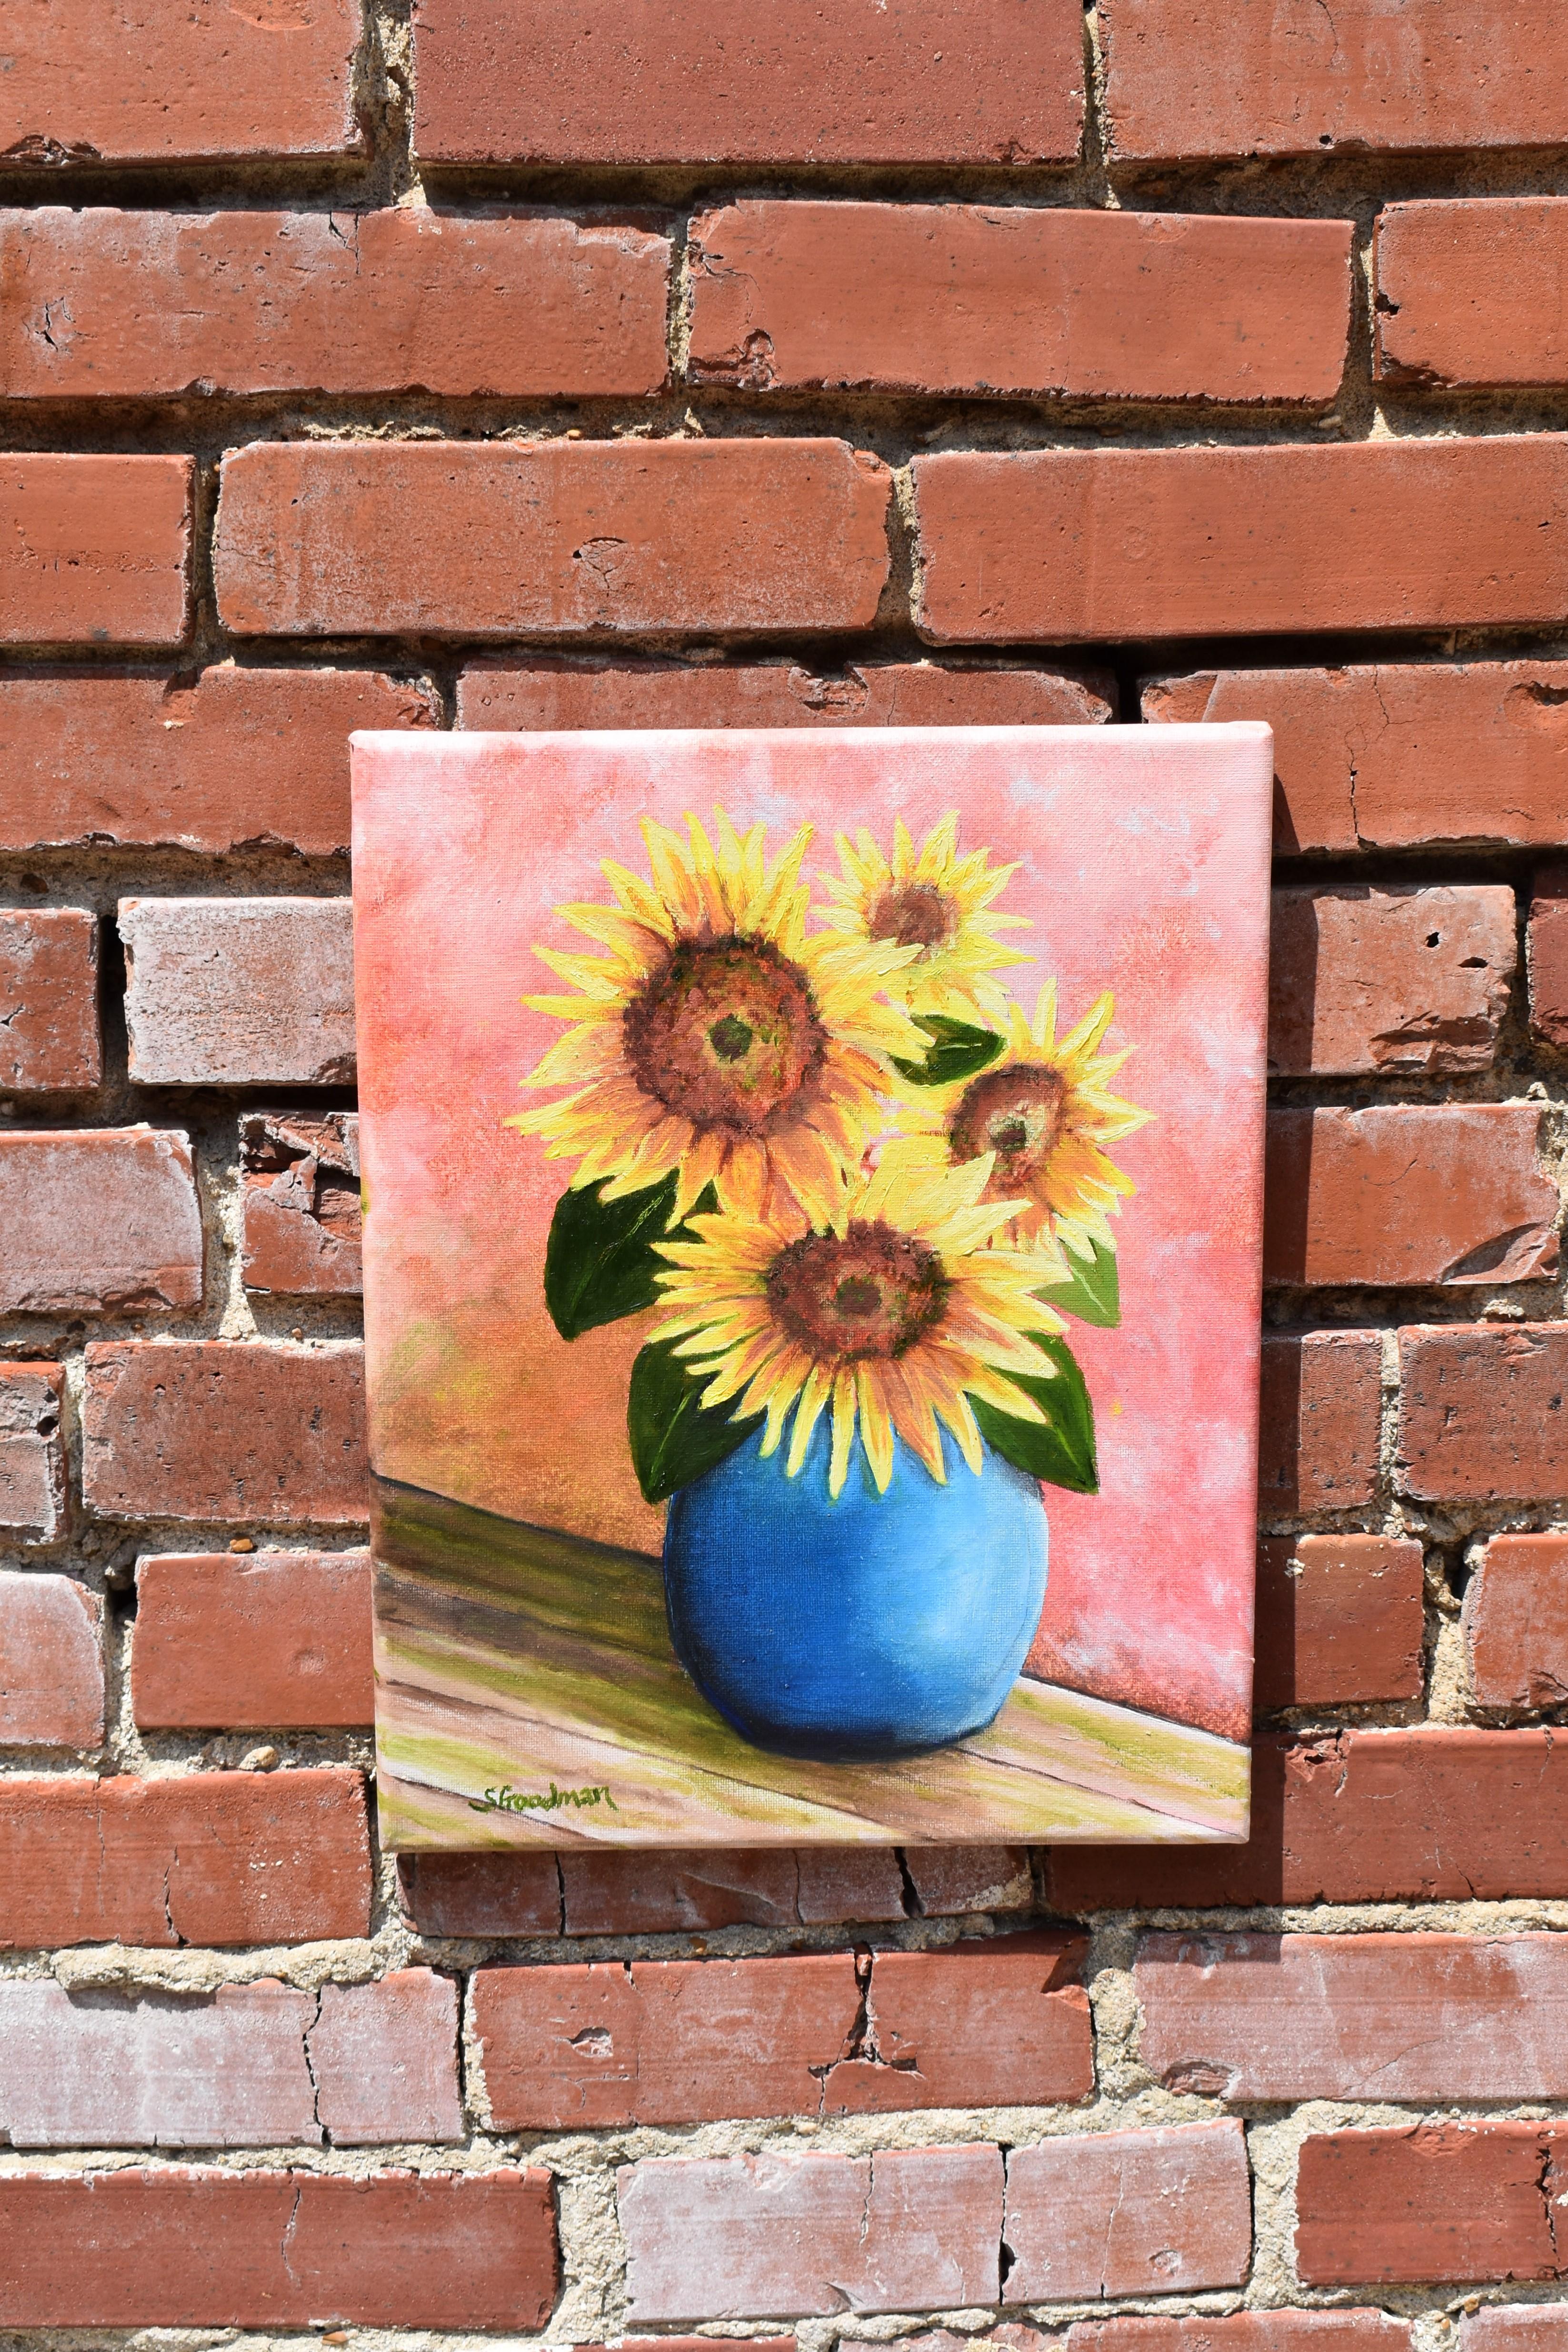 <p>Artist Comments<br>Artist Shela Goodman paints bright and colorful sunflowers in a blue vase. The impressionist still life captures the simplicity and beauty of nature. Shela paints vibrant yellow petals popping against the soft peach background.